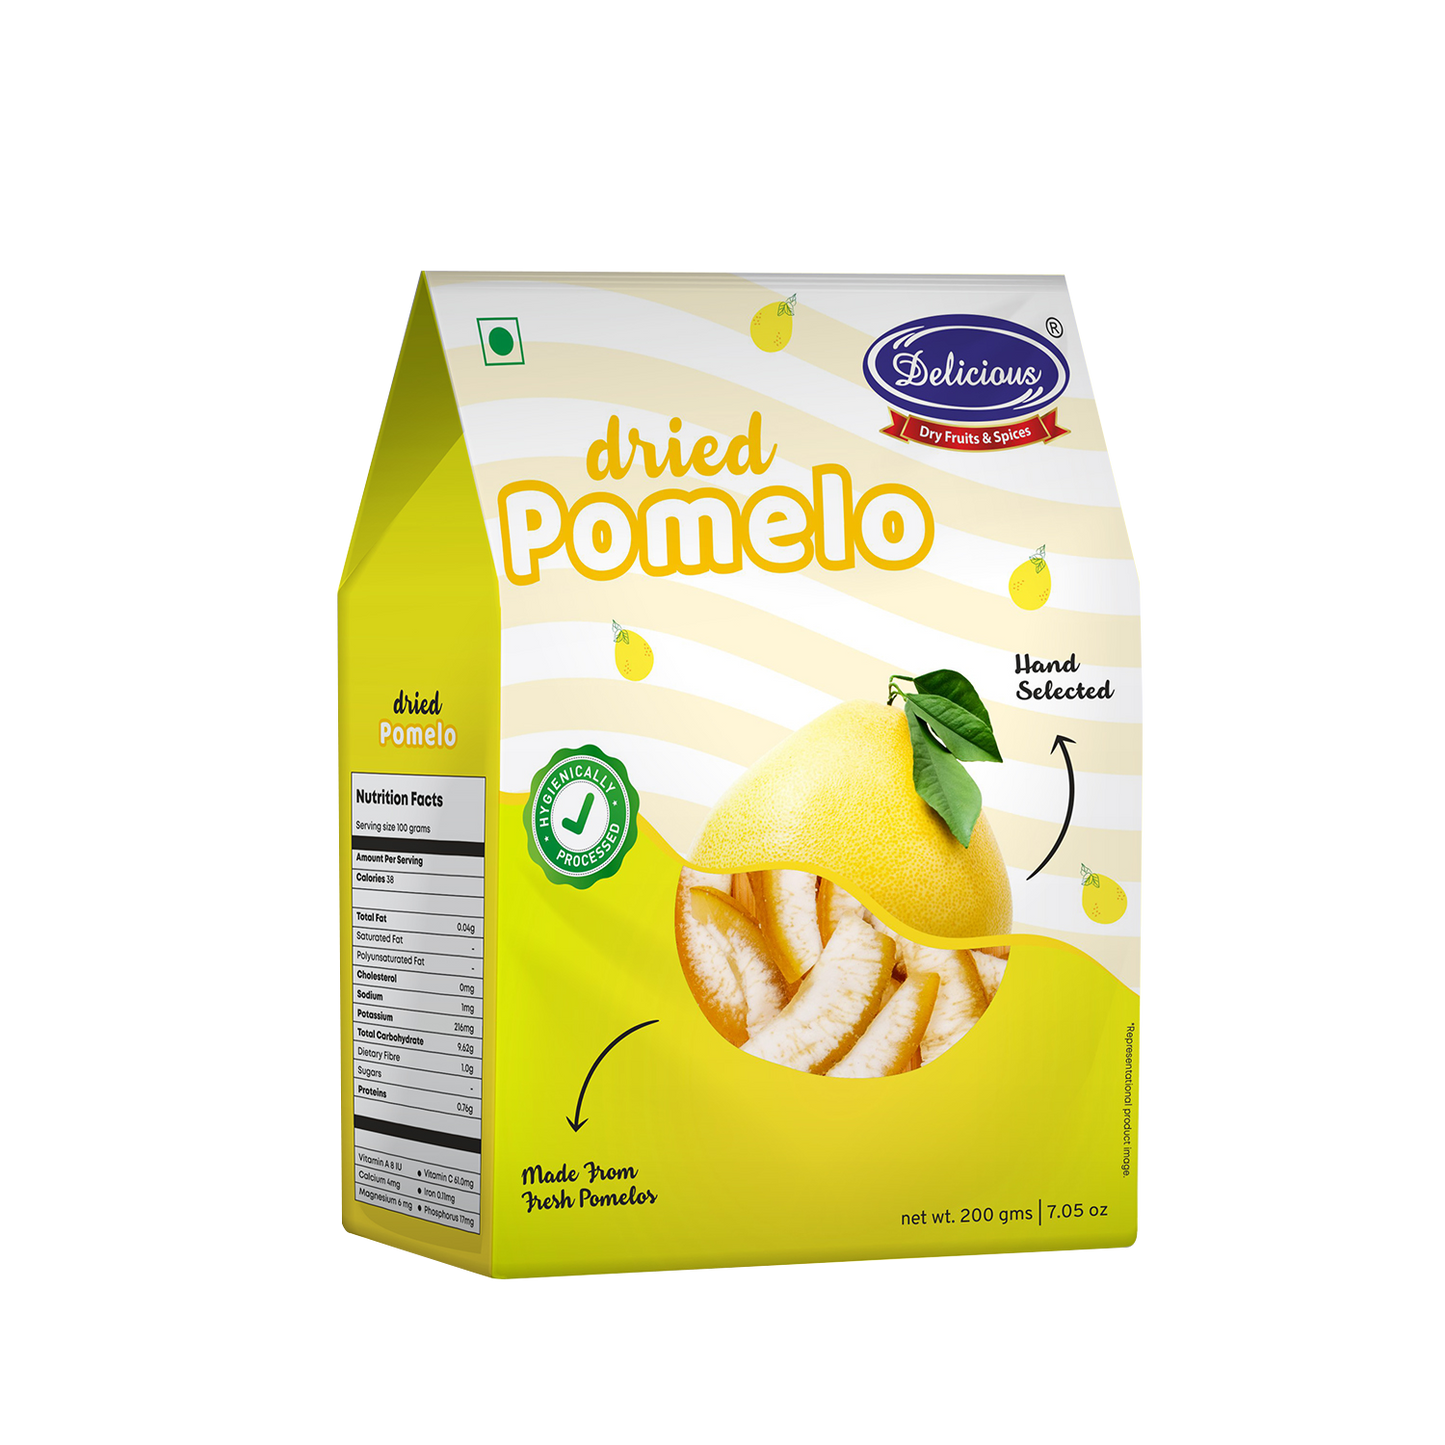 Delicious Dried Pamelo